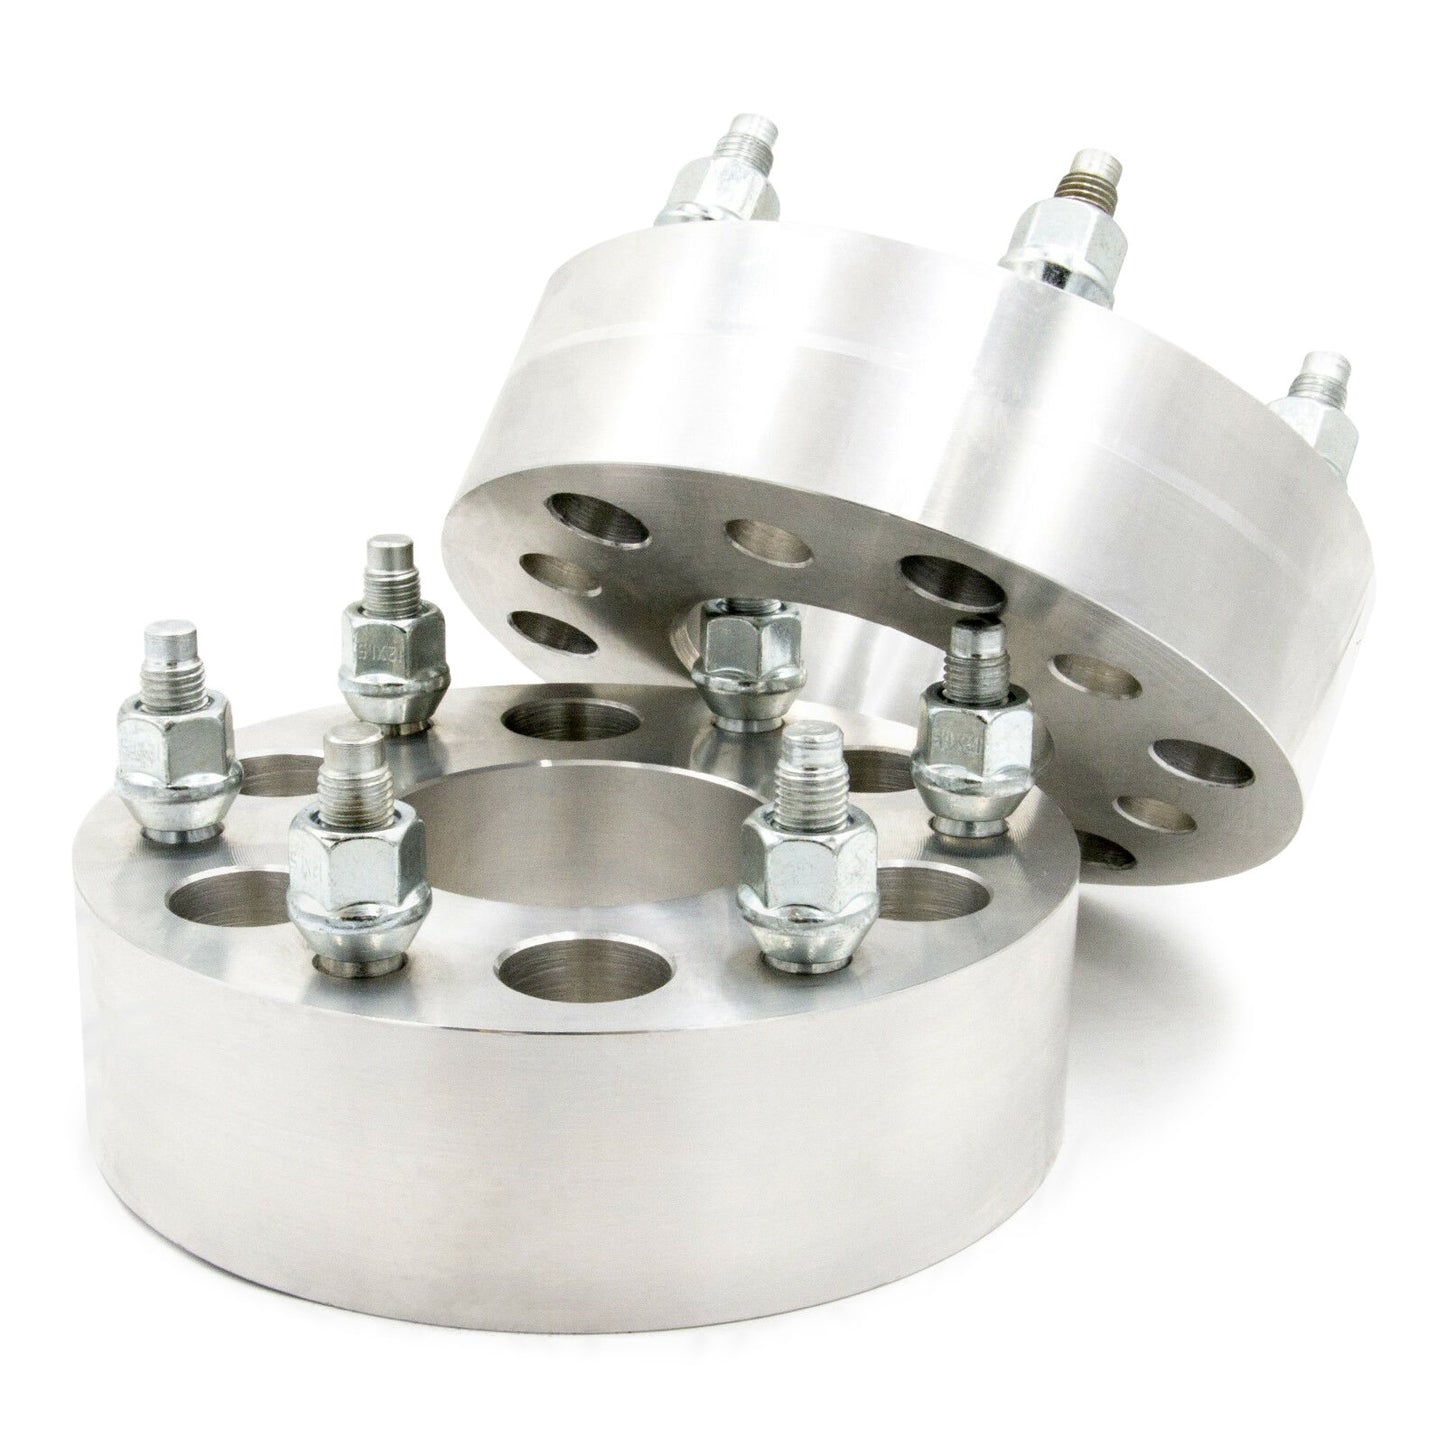 6x132 to 6x120 Wheel Spacer/Adapter - Thickness: 3/4"- 4"